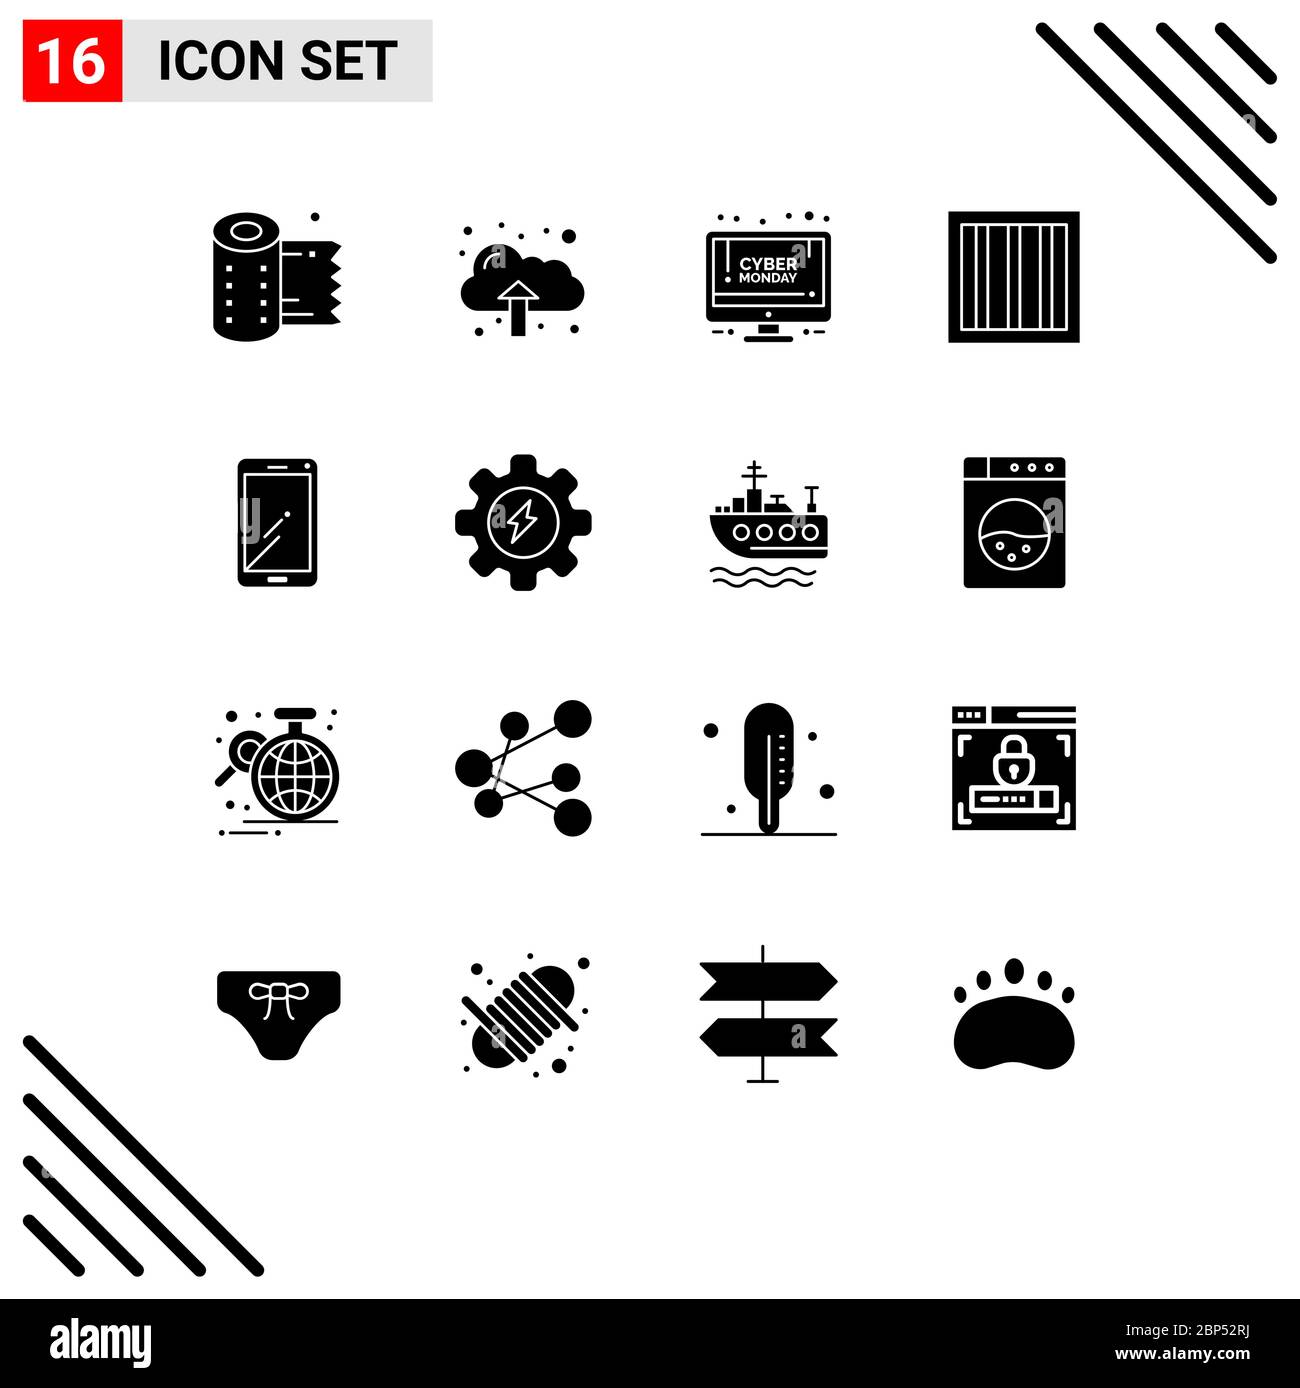 16 Thematic Vector Solid Glyphs and Editable Symbols of huawei, smart phone, discount, phone, jail Editable Vector Design Elements Stock Vector